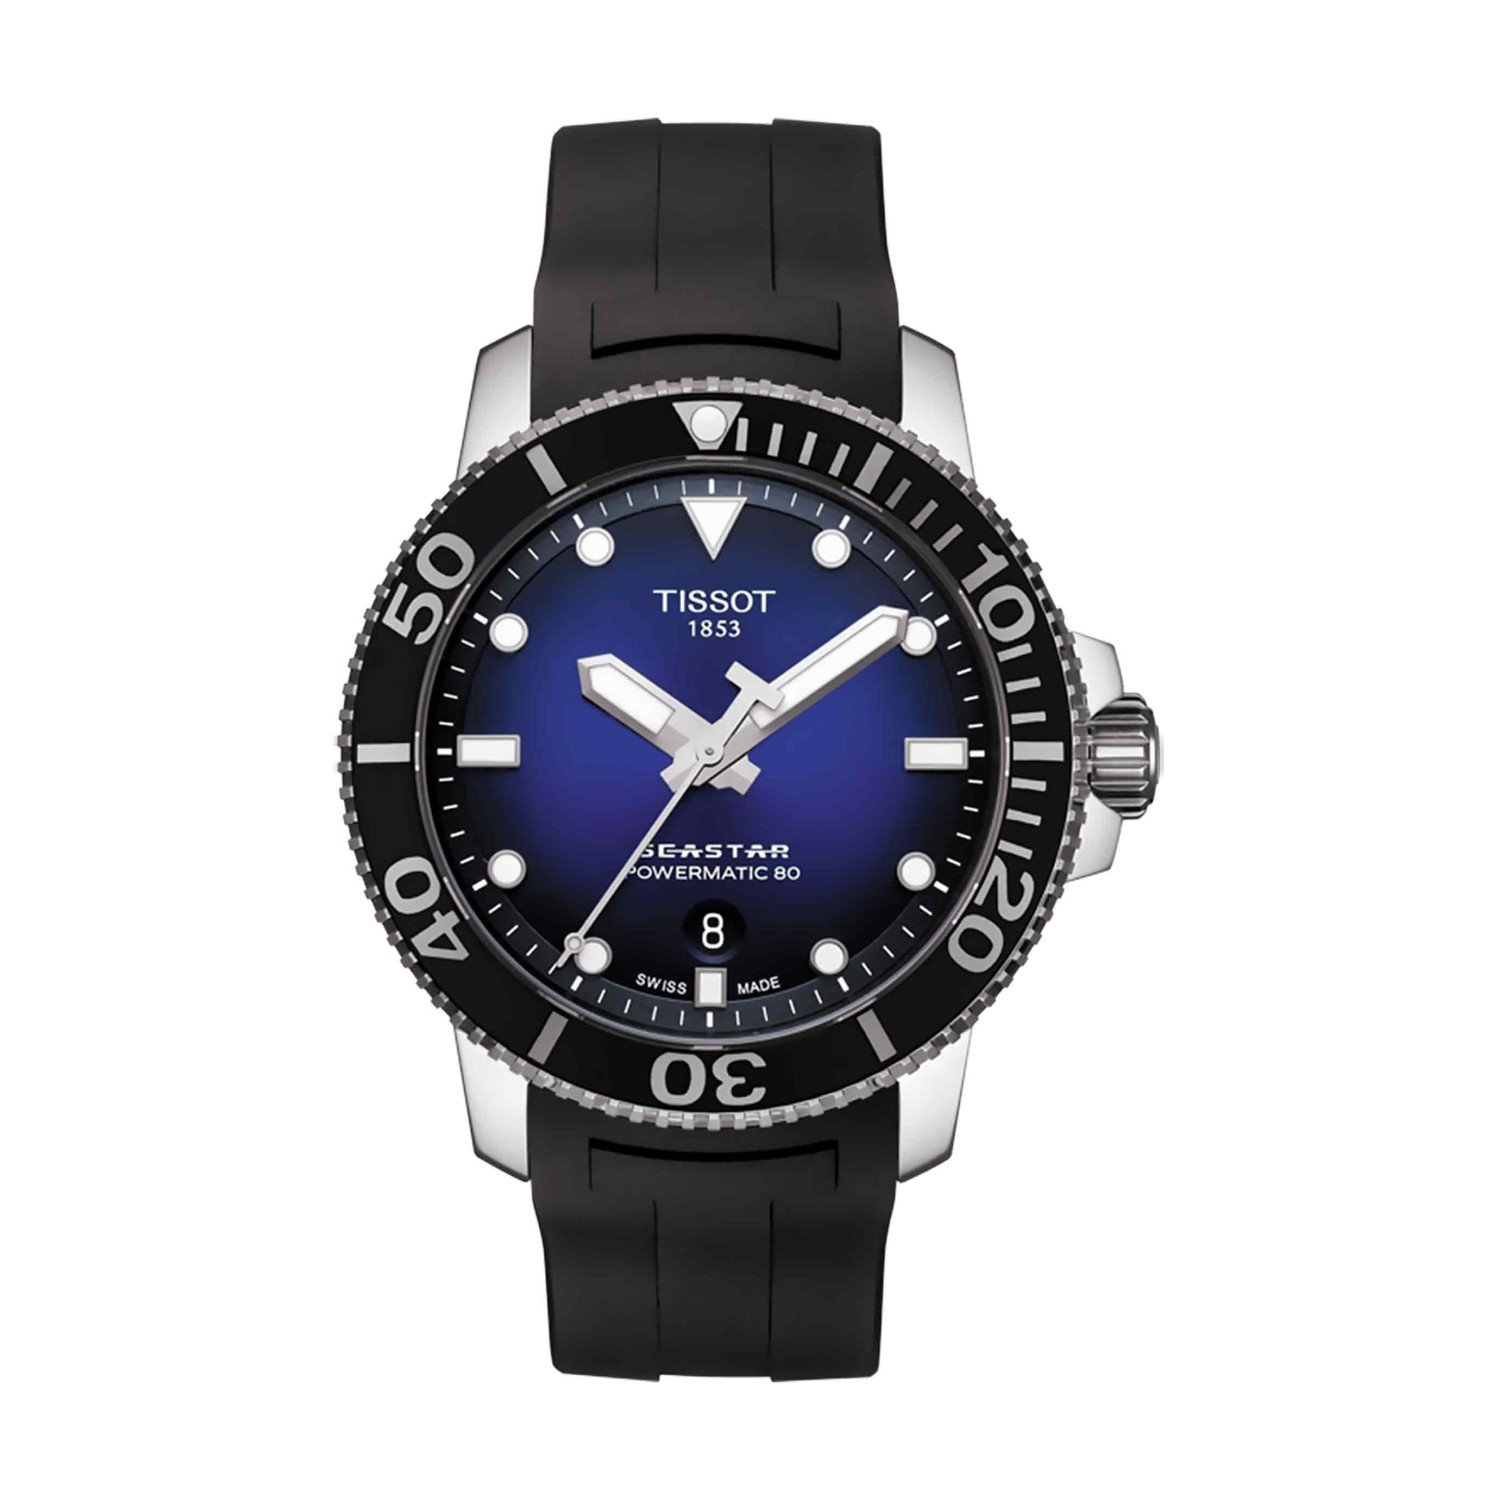 TISSOT SEASTAR 1000 Powermatic 80 T120.407.17.041.00. The Tissot Seastar 1000 merges style and performance without compromising either. The diving inspiration shapes both the appearance and the functionality of this watch. It maintains its performance to 